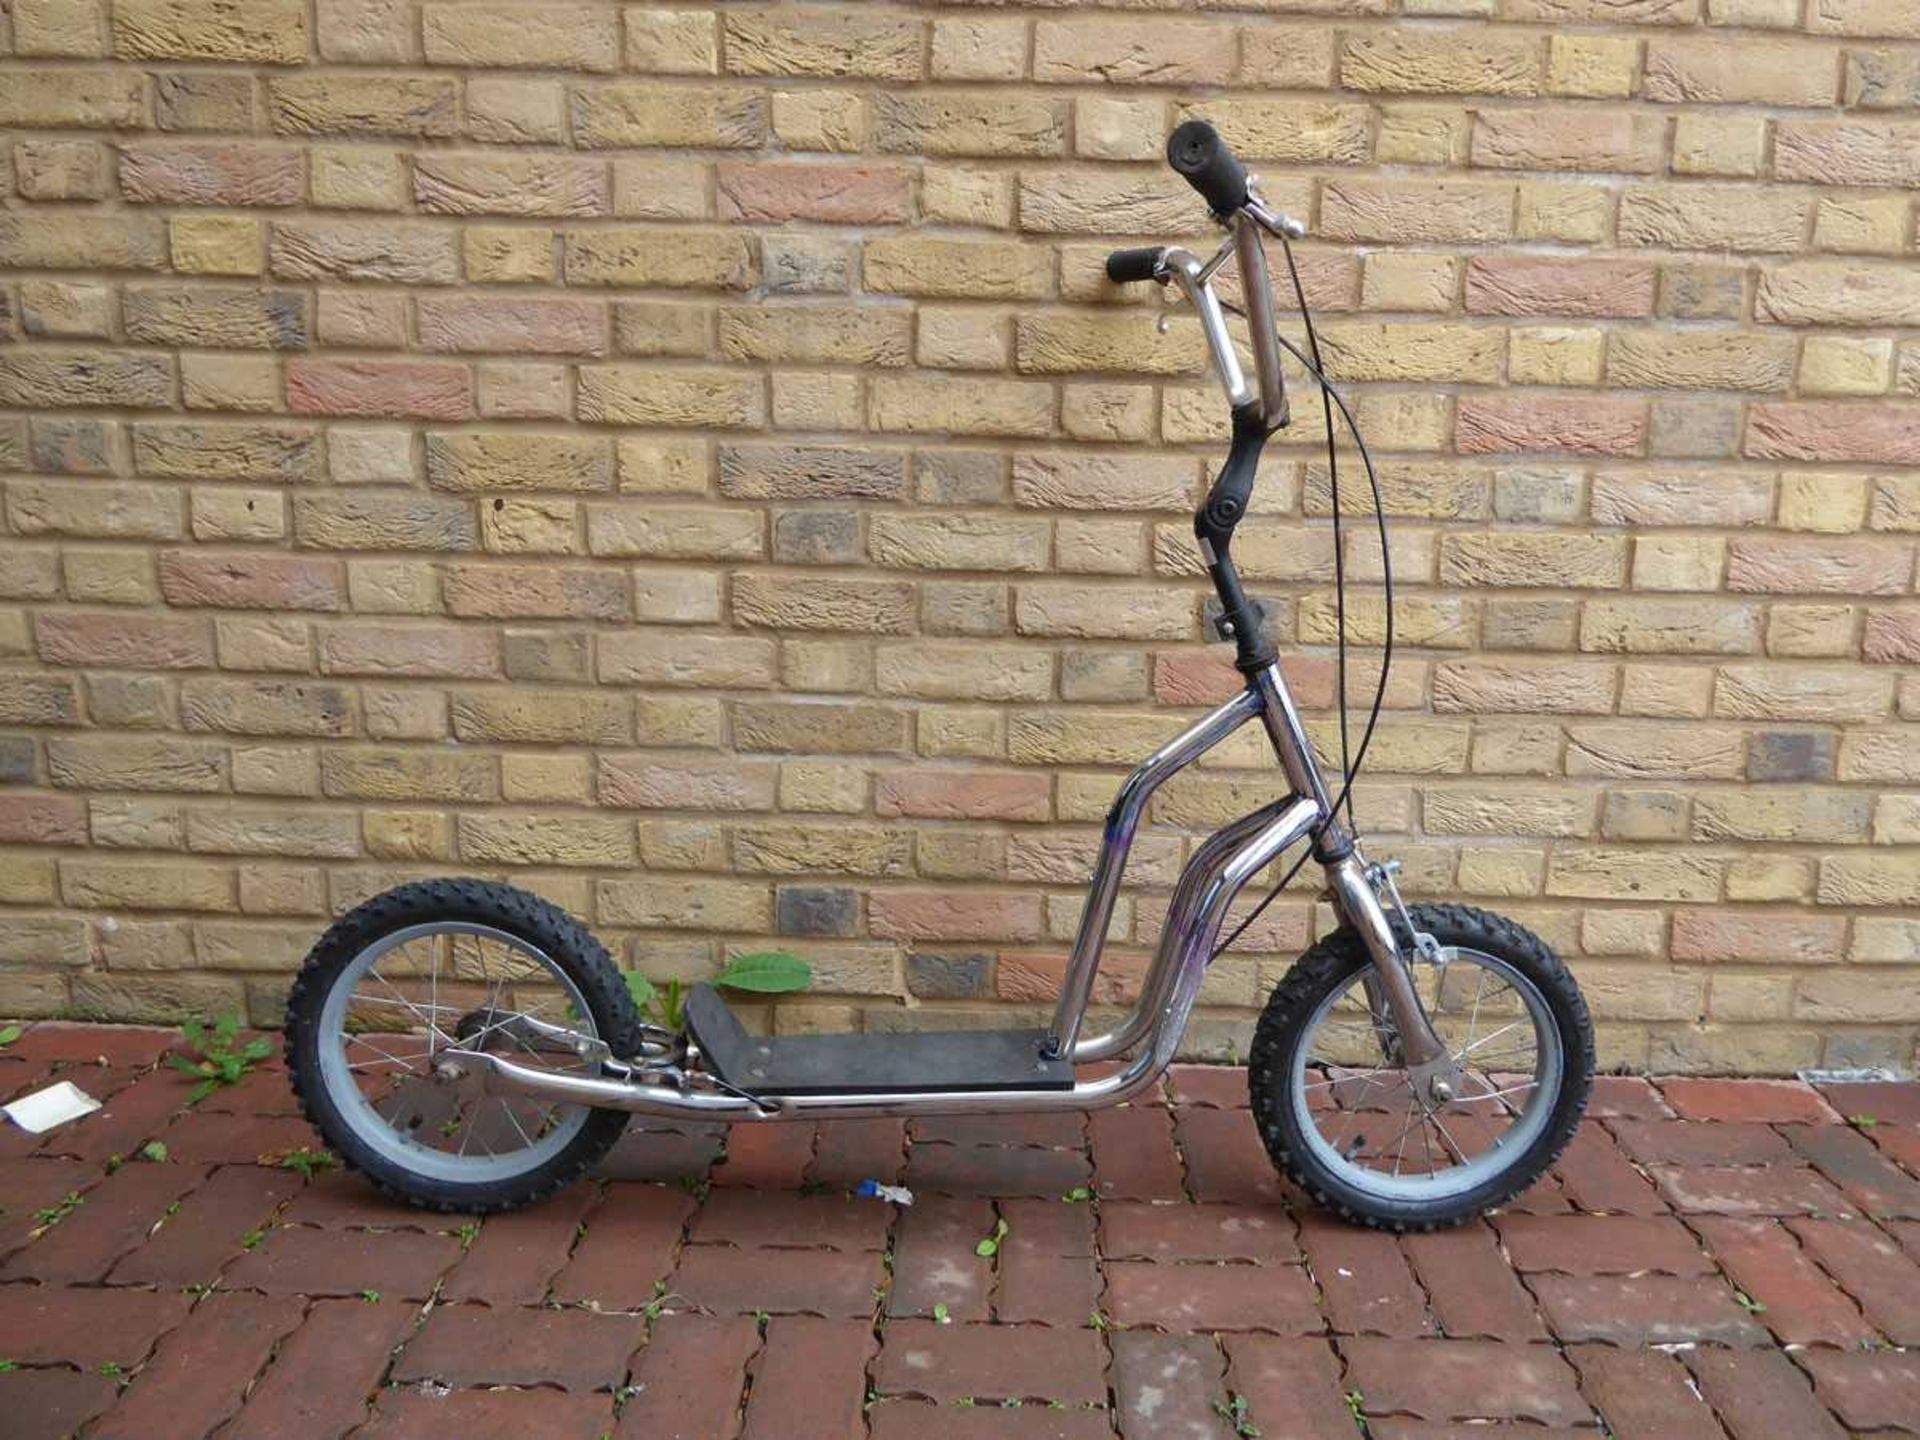 2 wheel scooter